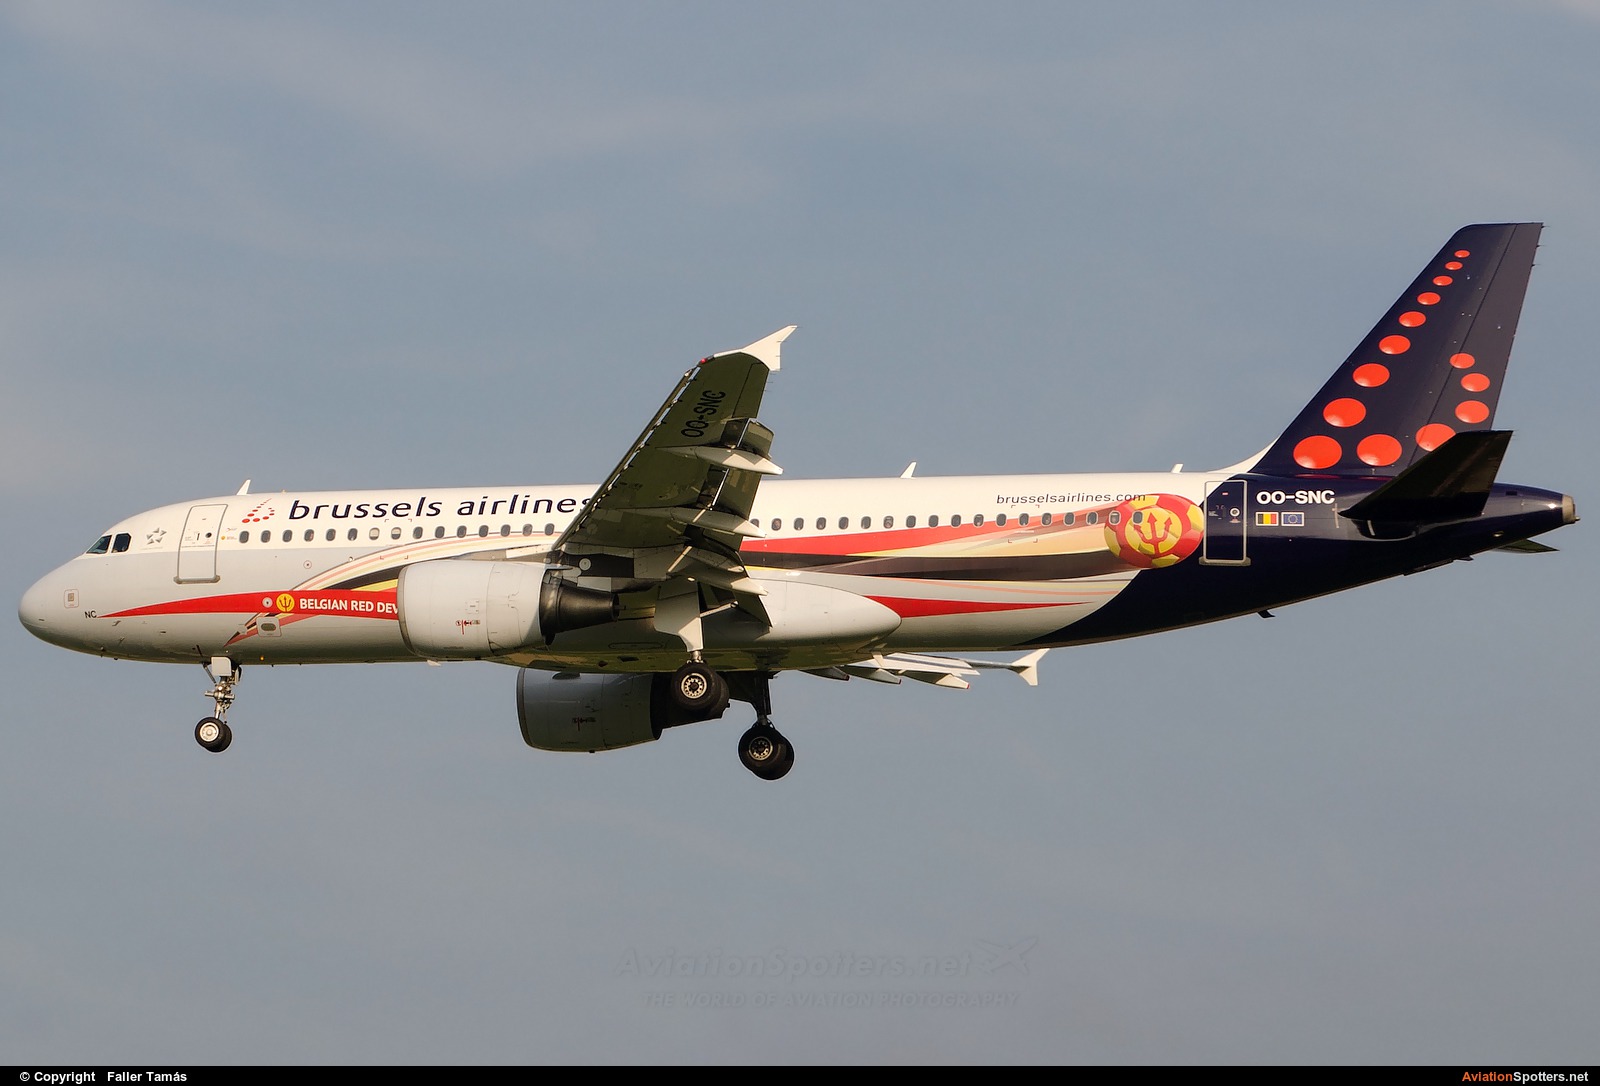 Brussels Airlines  -  A320-214  (OO-SNC) By Faller Tamás (fallto78)